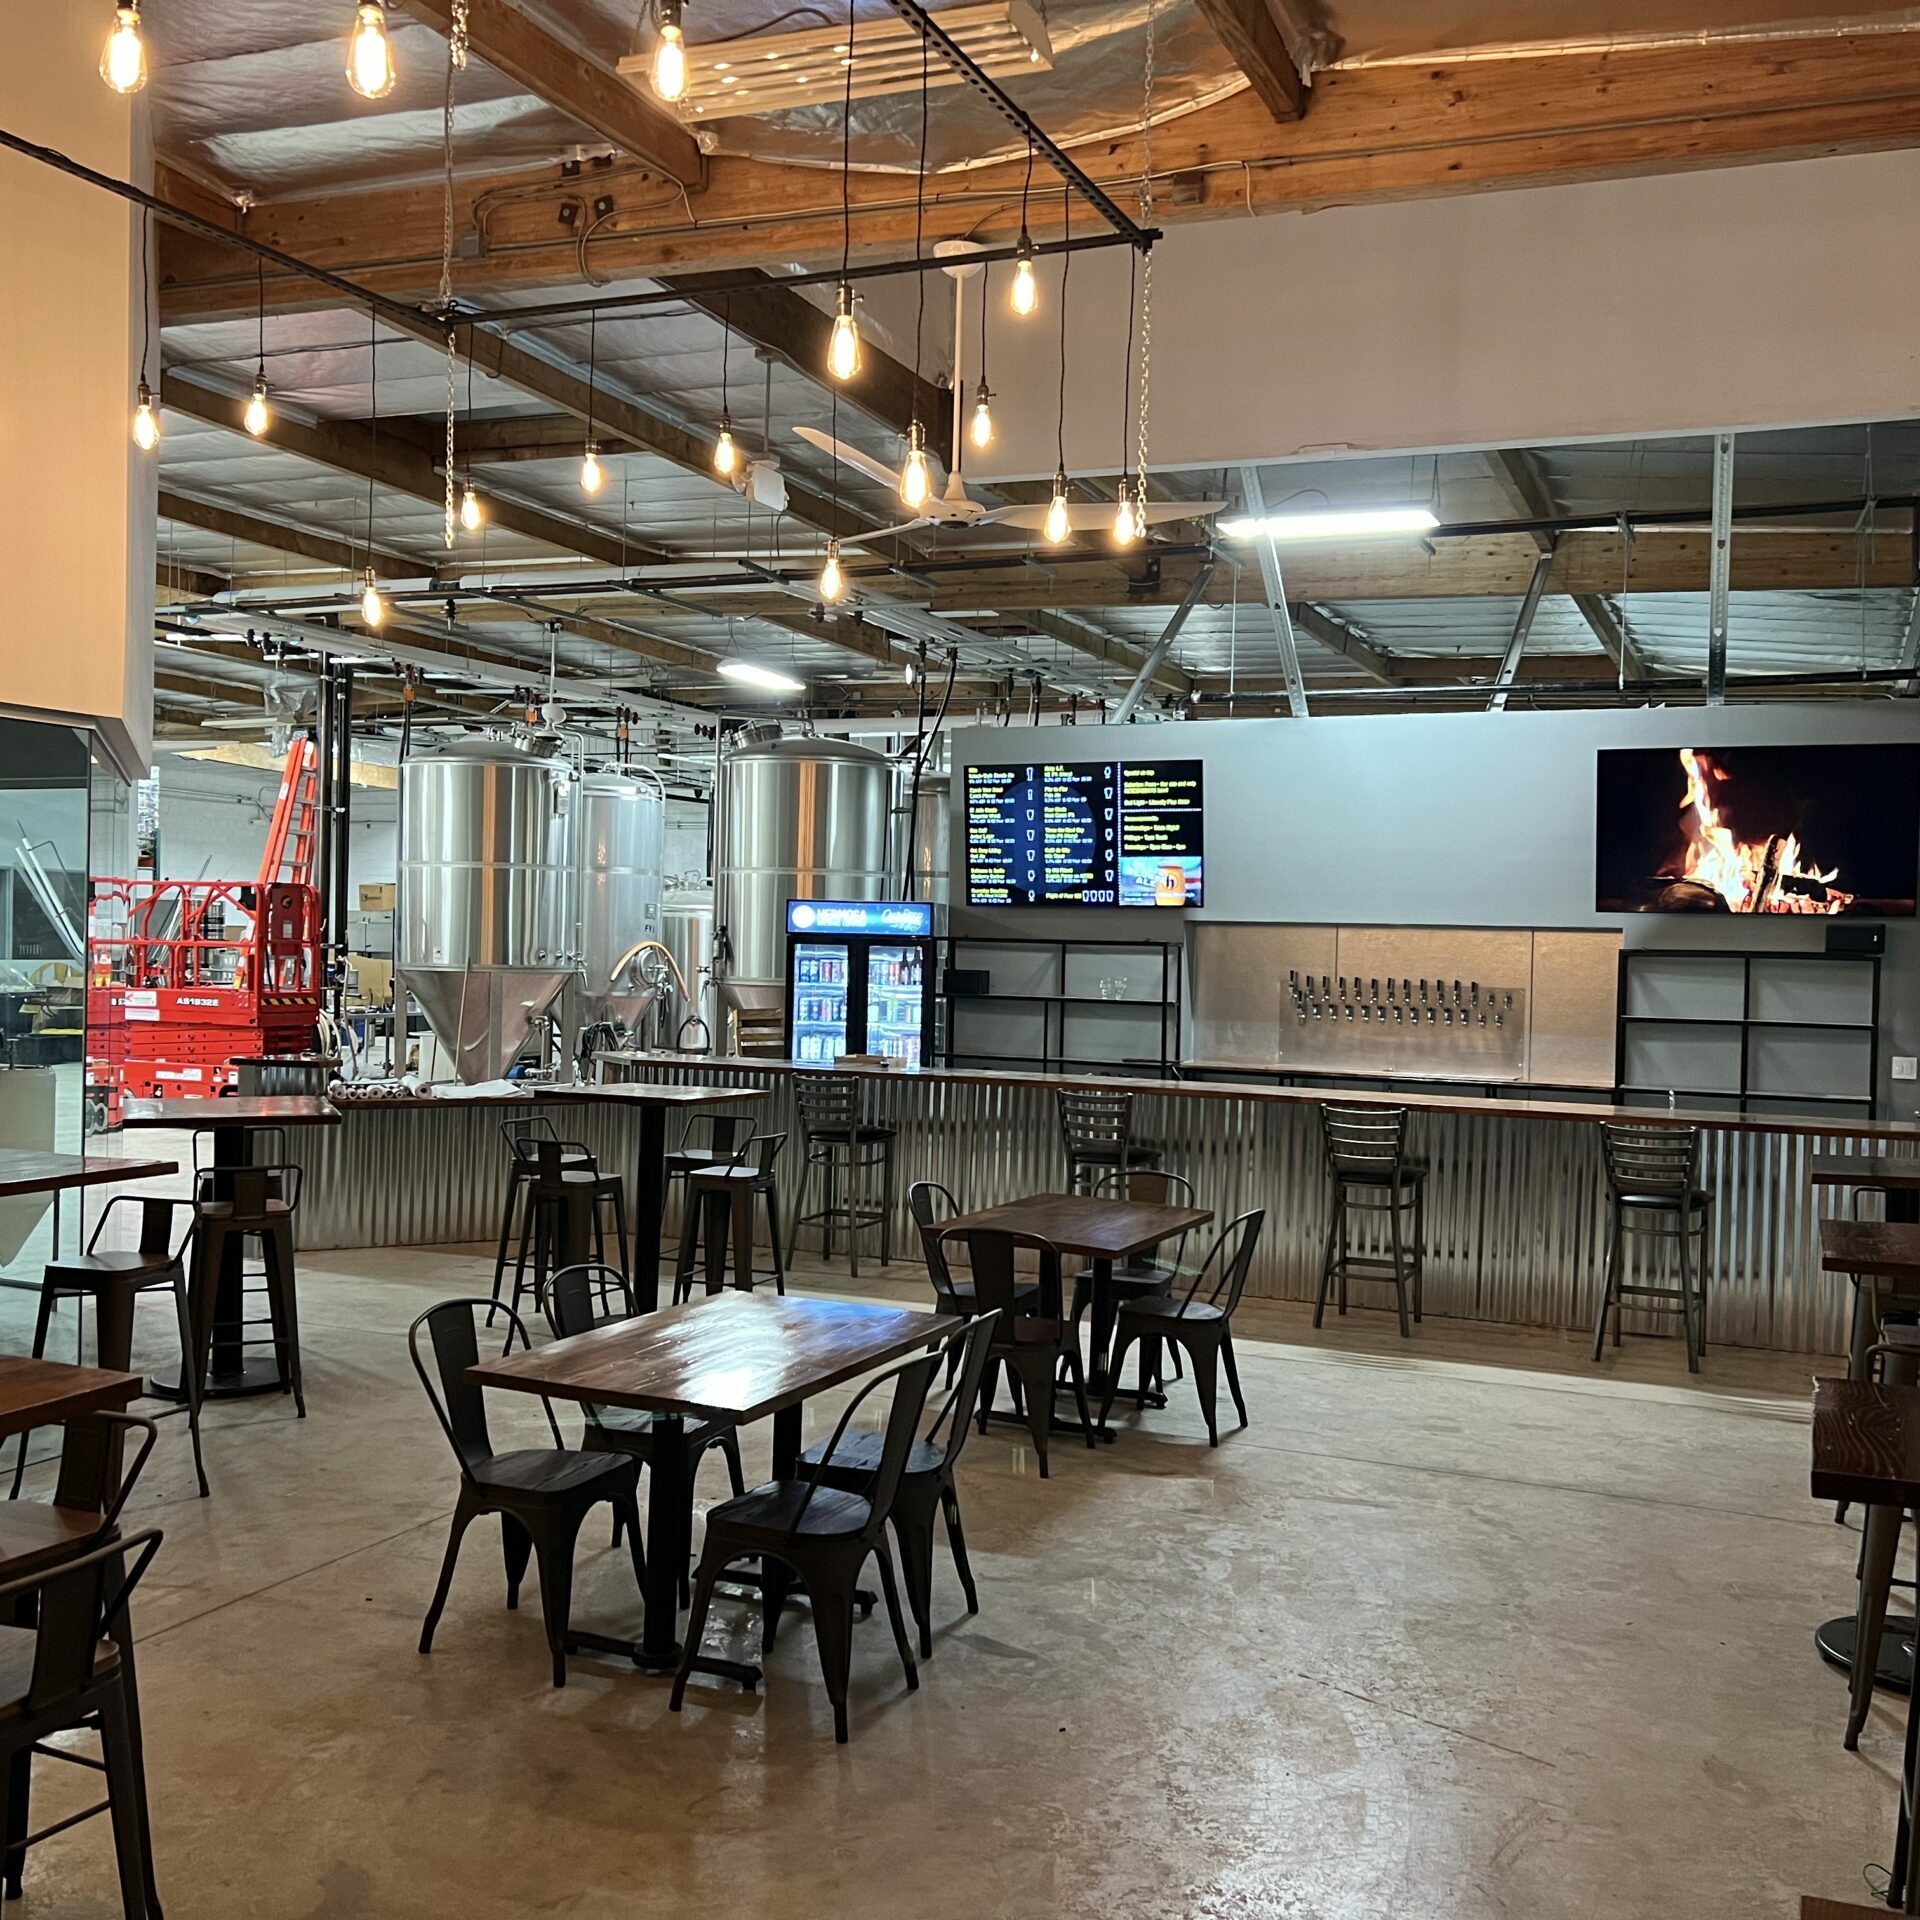 Inside brewery taproom, no people